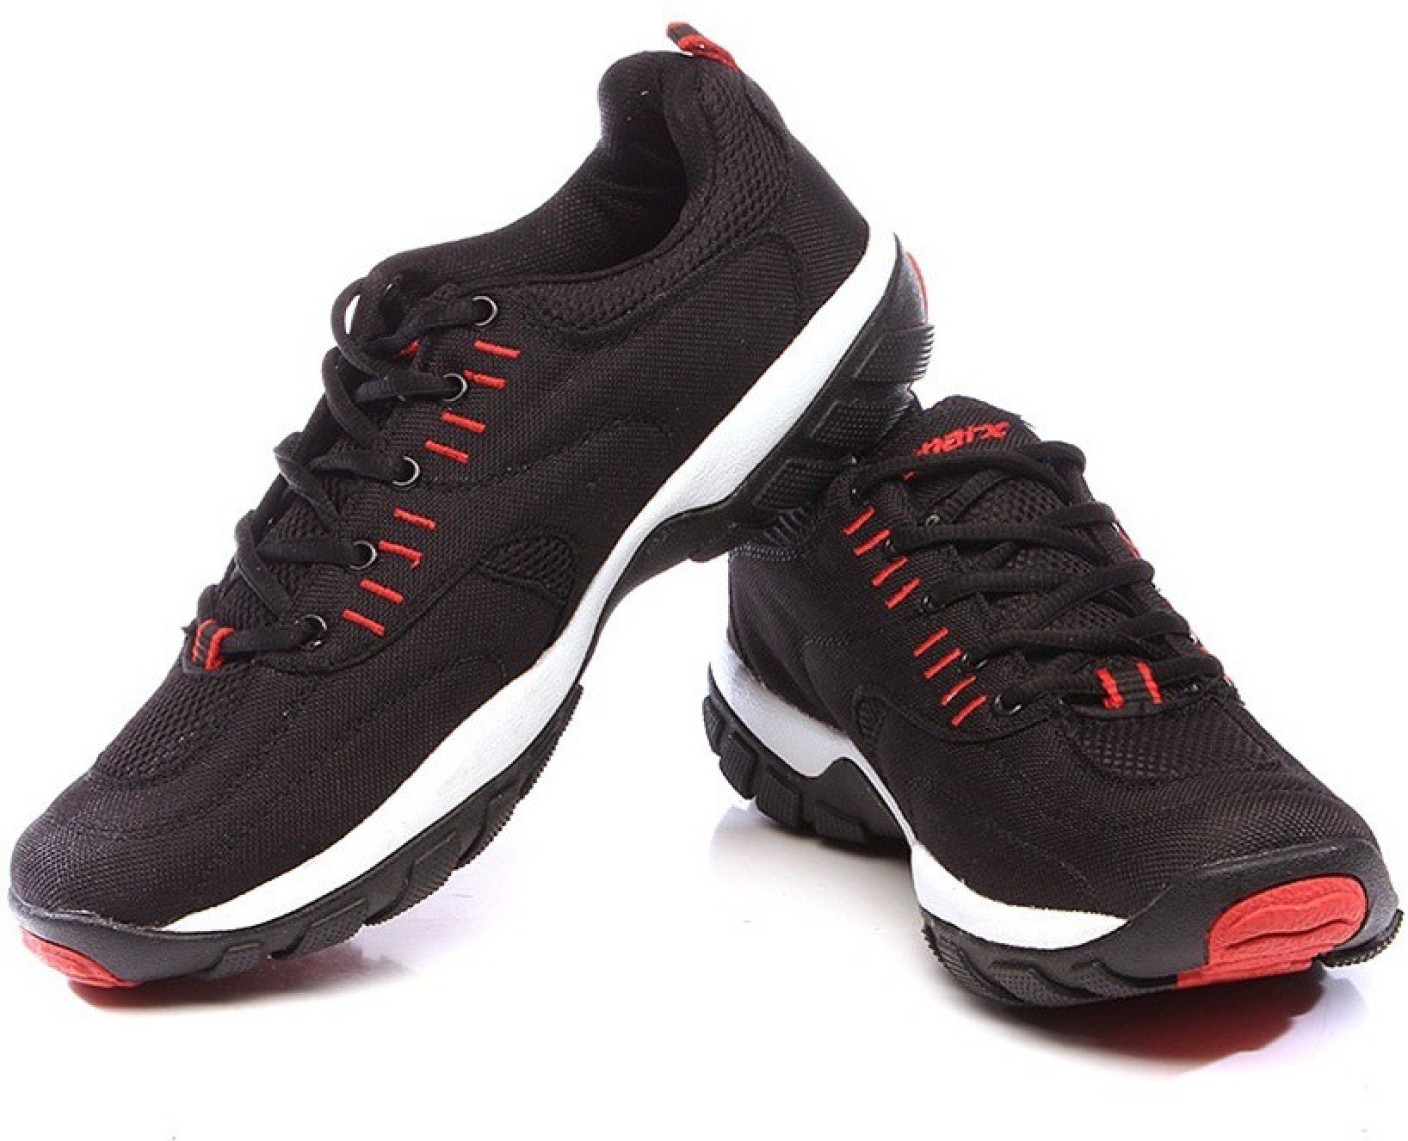 Sparx Attractive Black & Red Running Shoes For Men - Buy Black Color ...